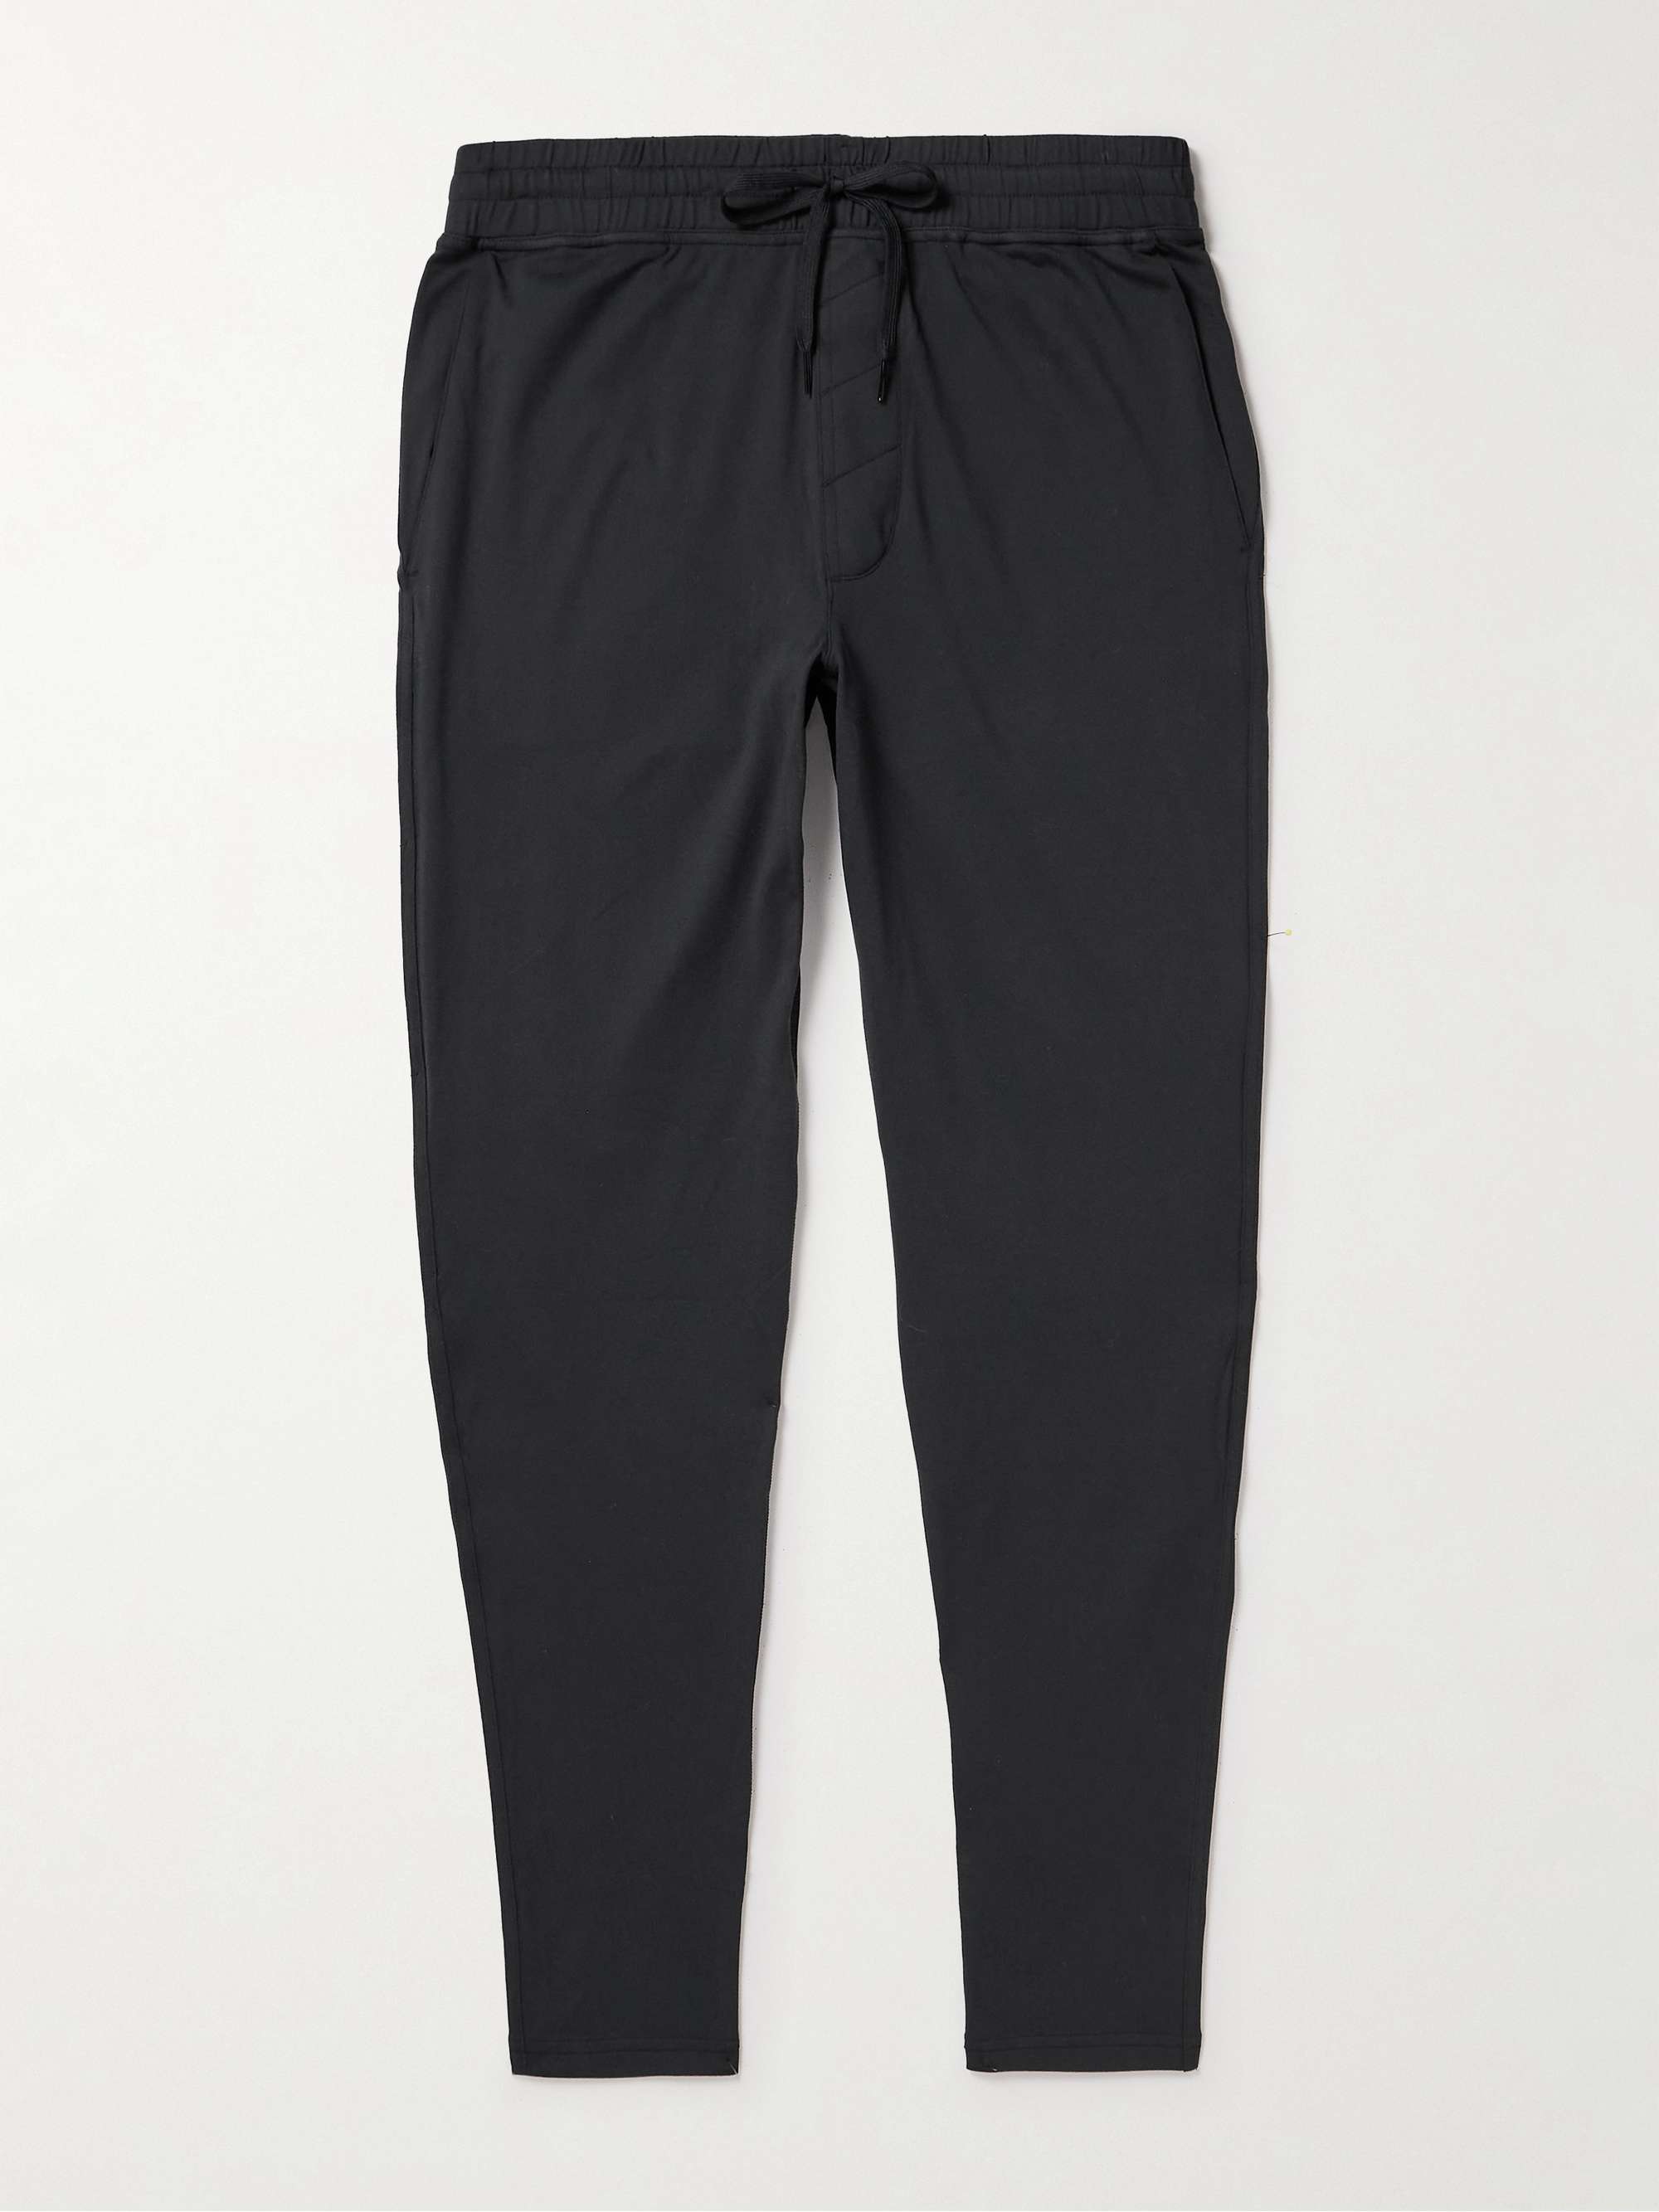 OUTDOOR VOICES All Day Stretch-Jersey Sweatpants for Men